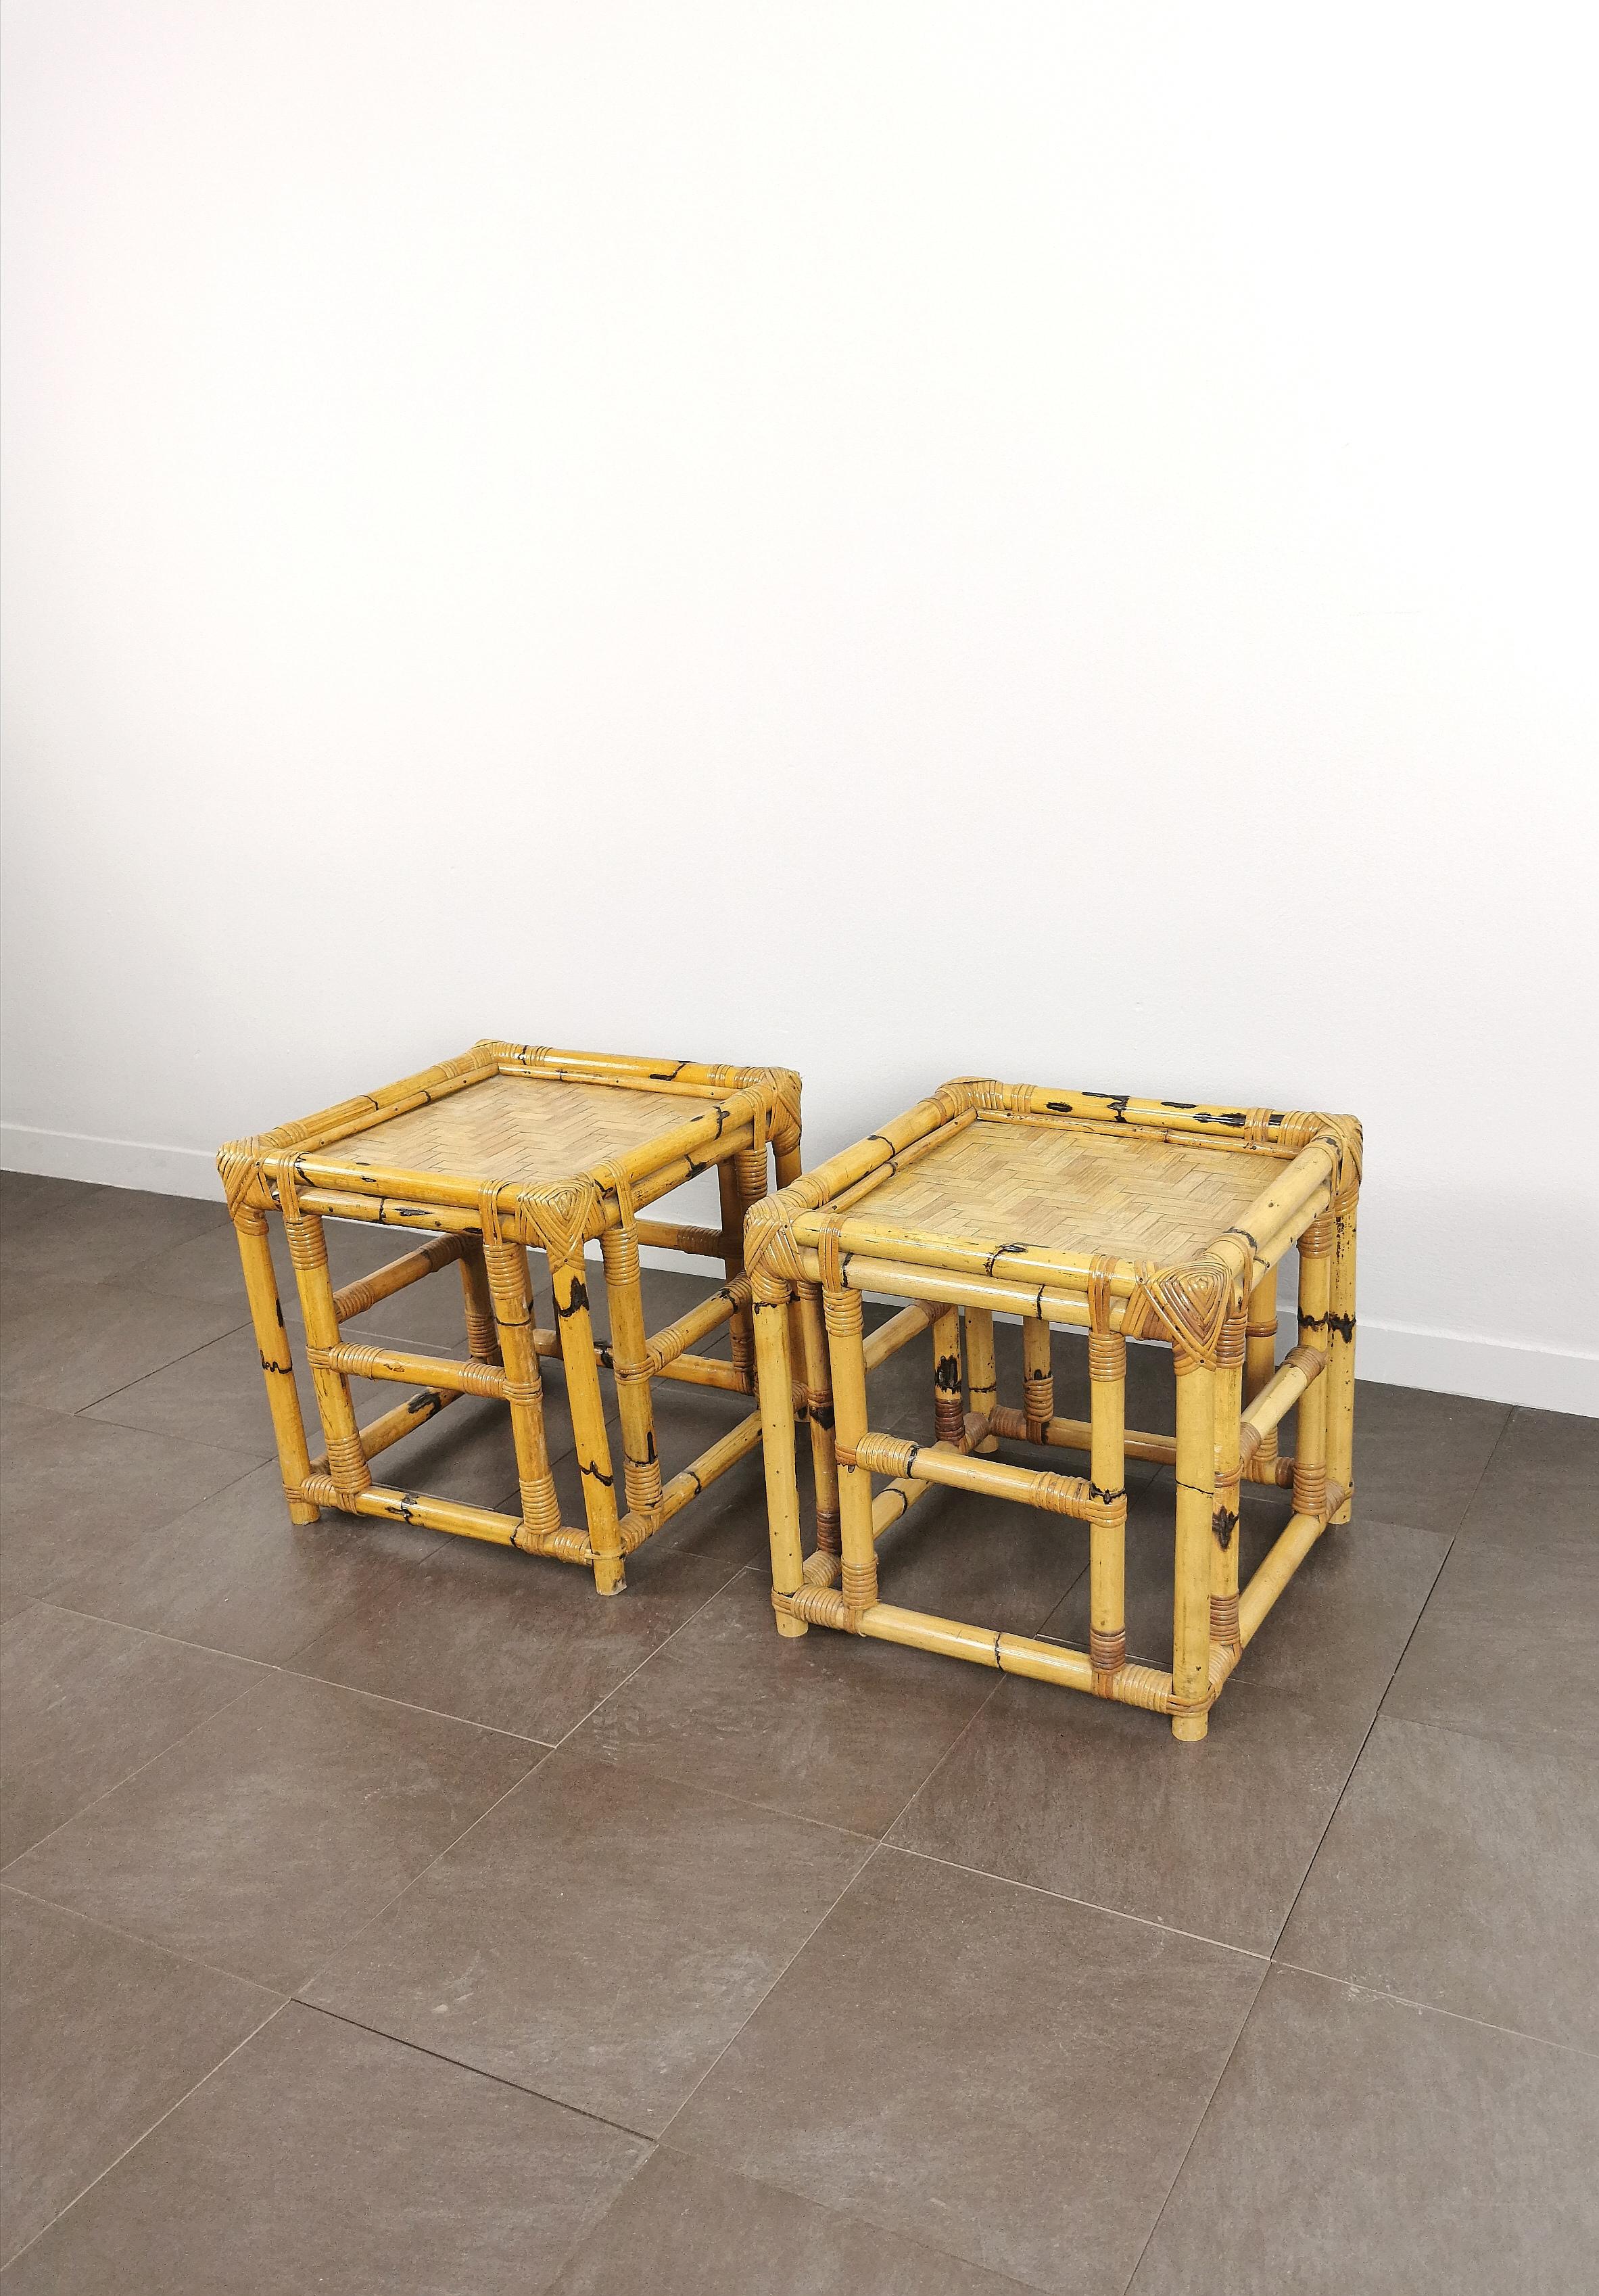 Pair of Coffee Tables Bamboo Cubic Vivai del Sud Midcentury Modern Italy 1970s  In Good Condition For Sale In Palermo, IT